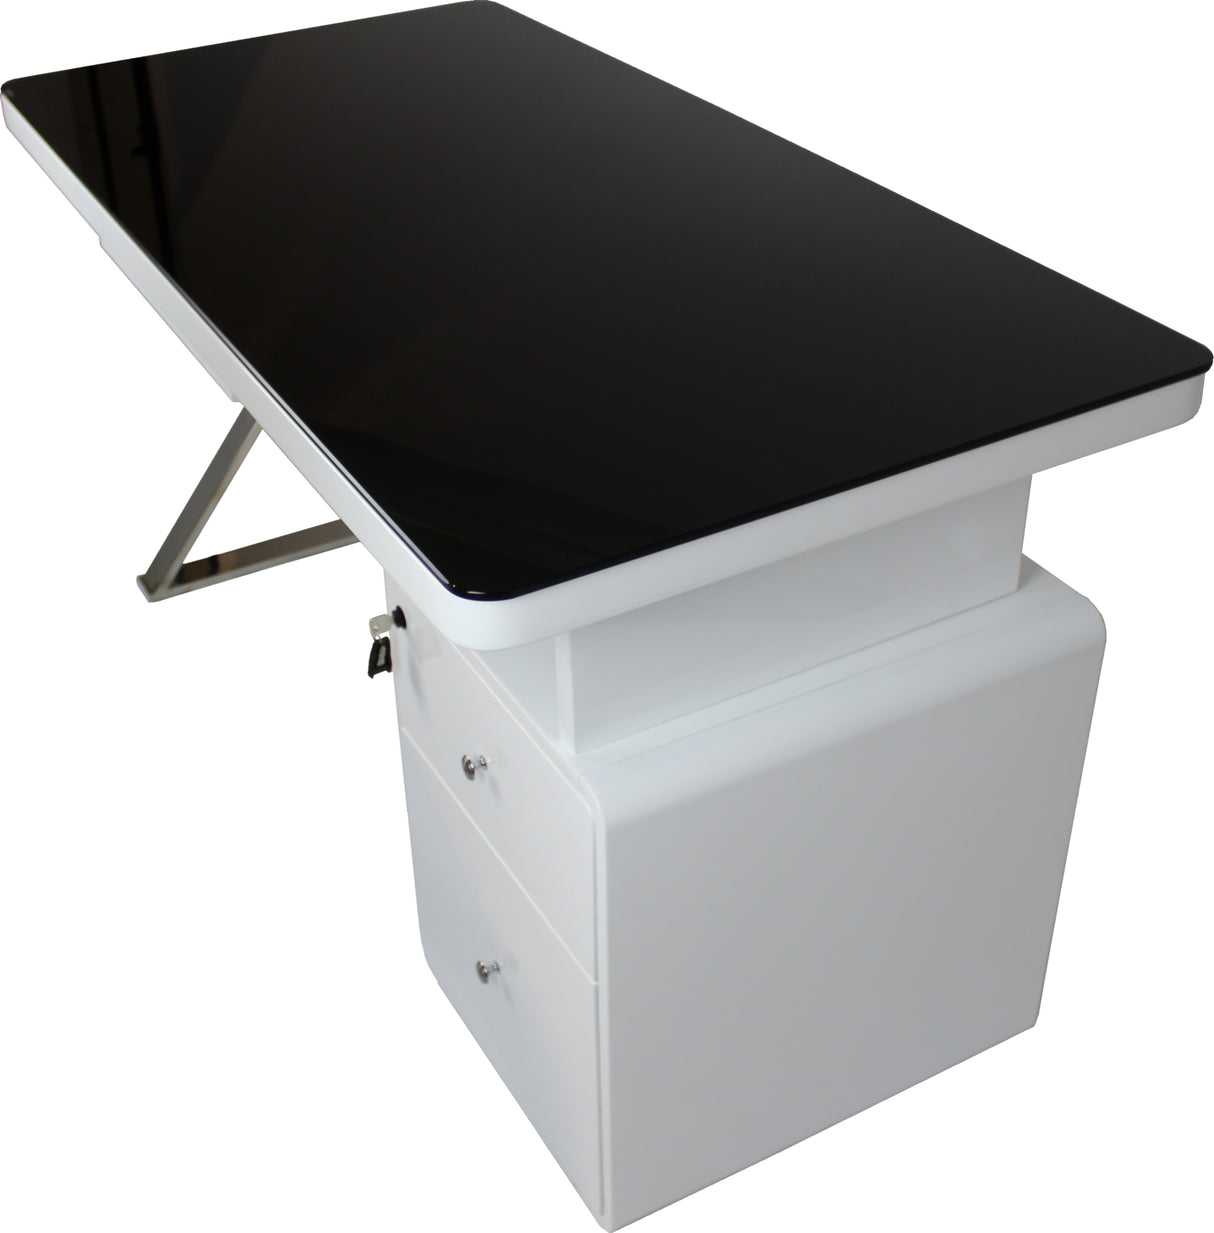 Contemporary Home Office Desk in Gloss White with Glass Top - MT702